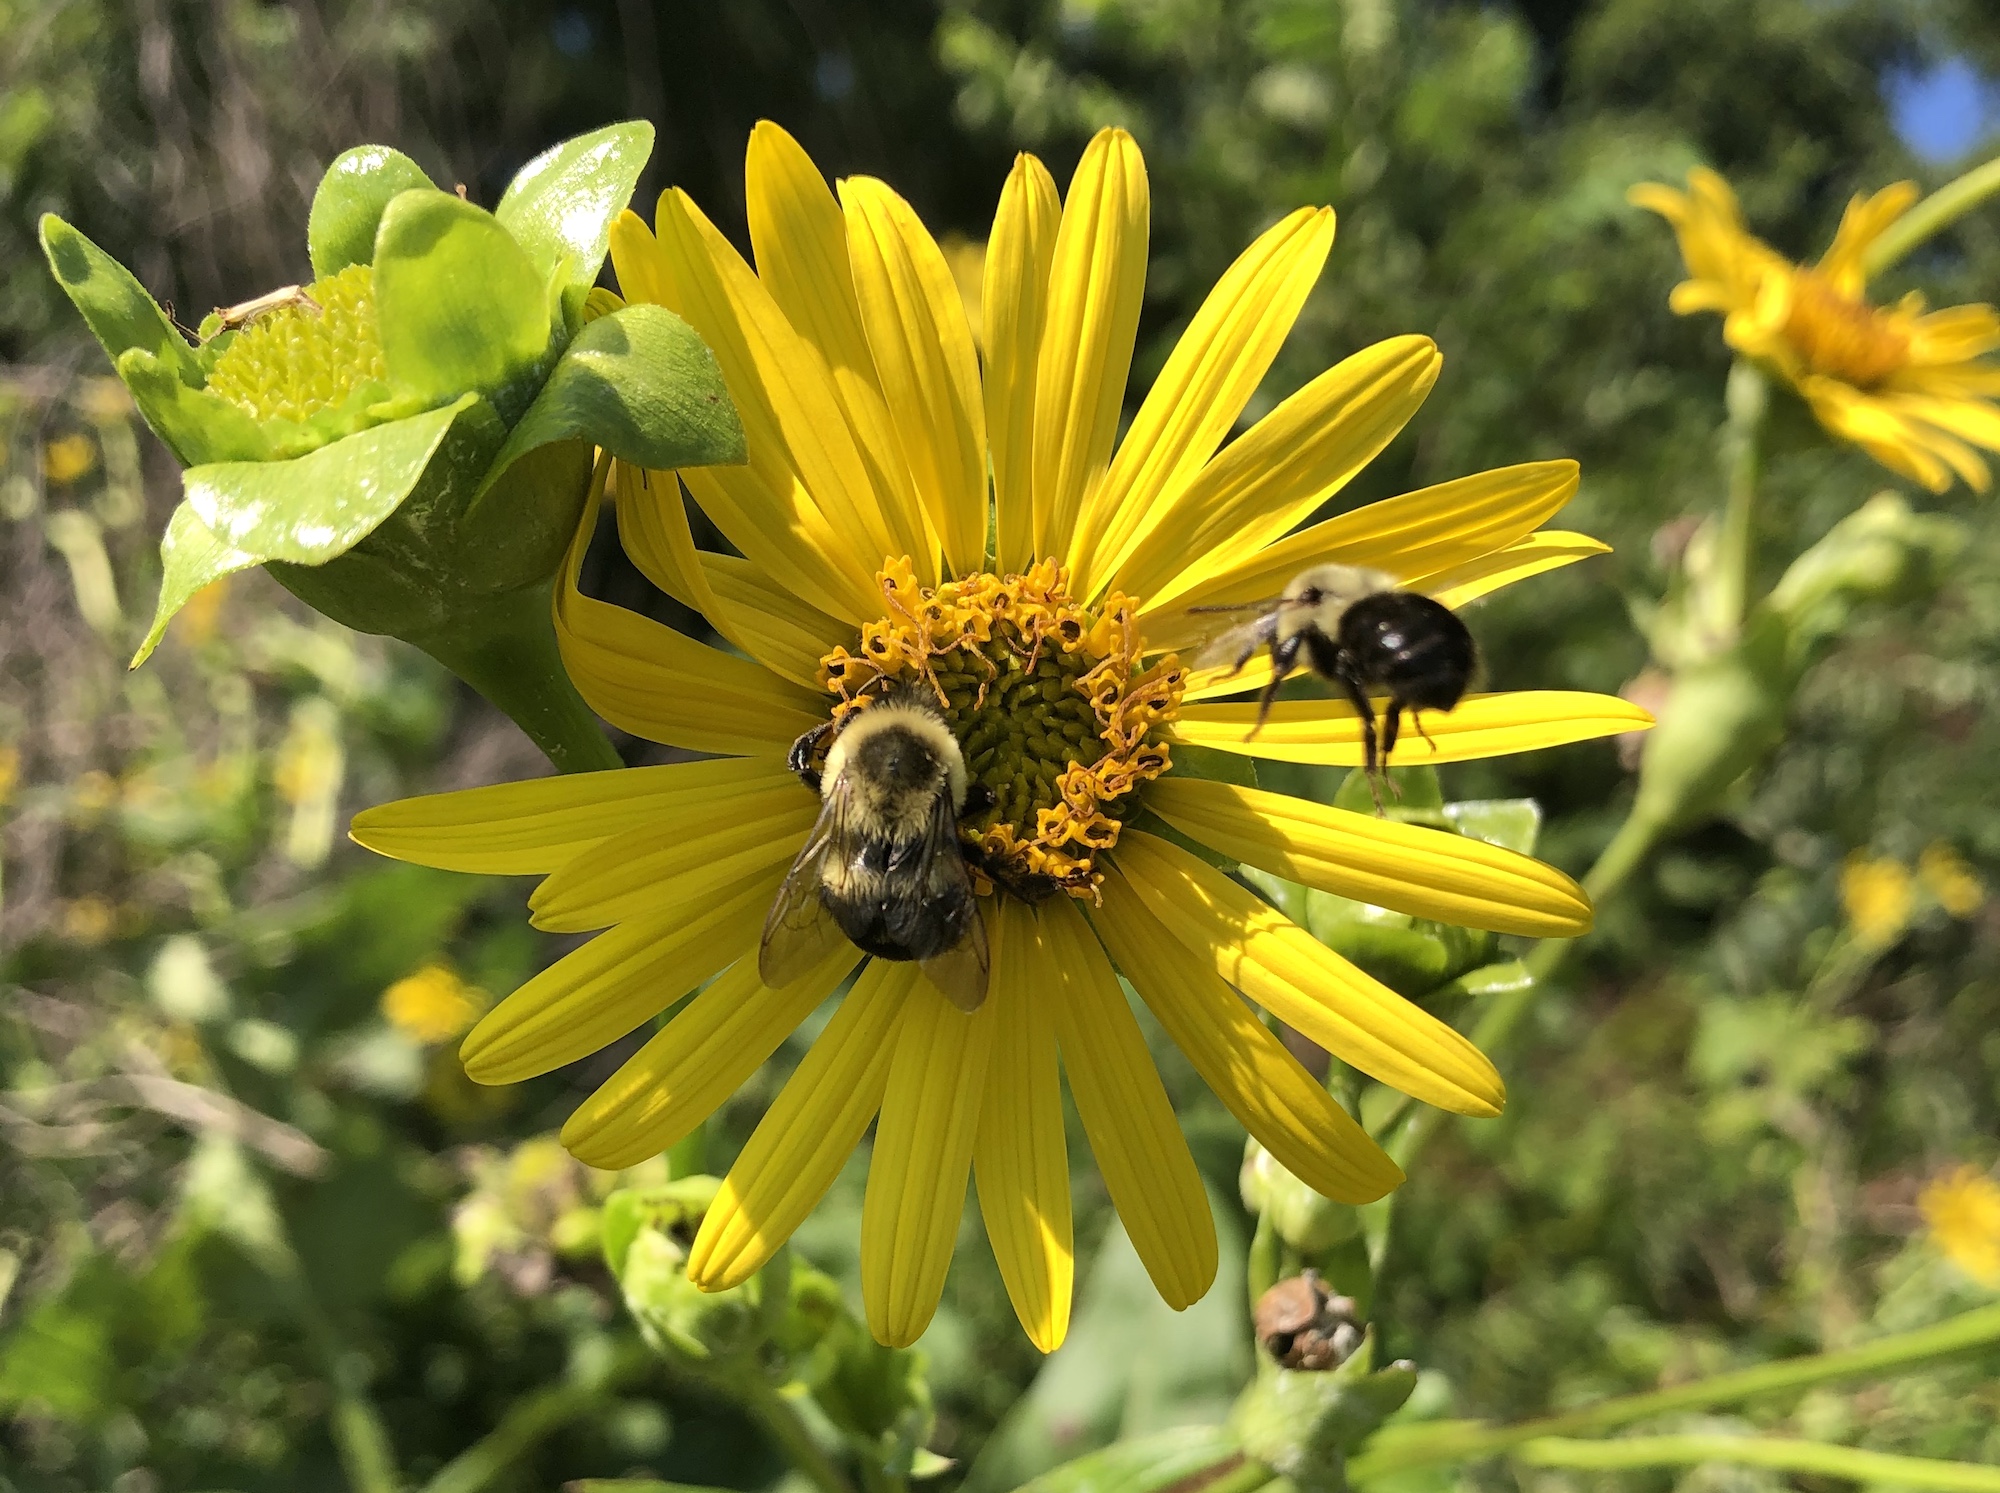 Bumblebee on Cup Plant on bank of Marion Dunn Pond on August 14, 2020.